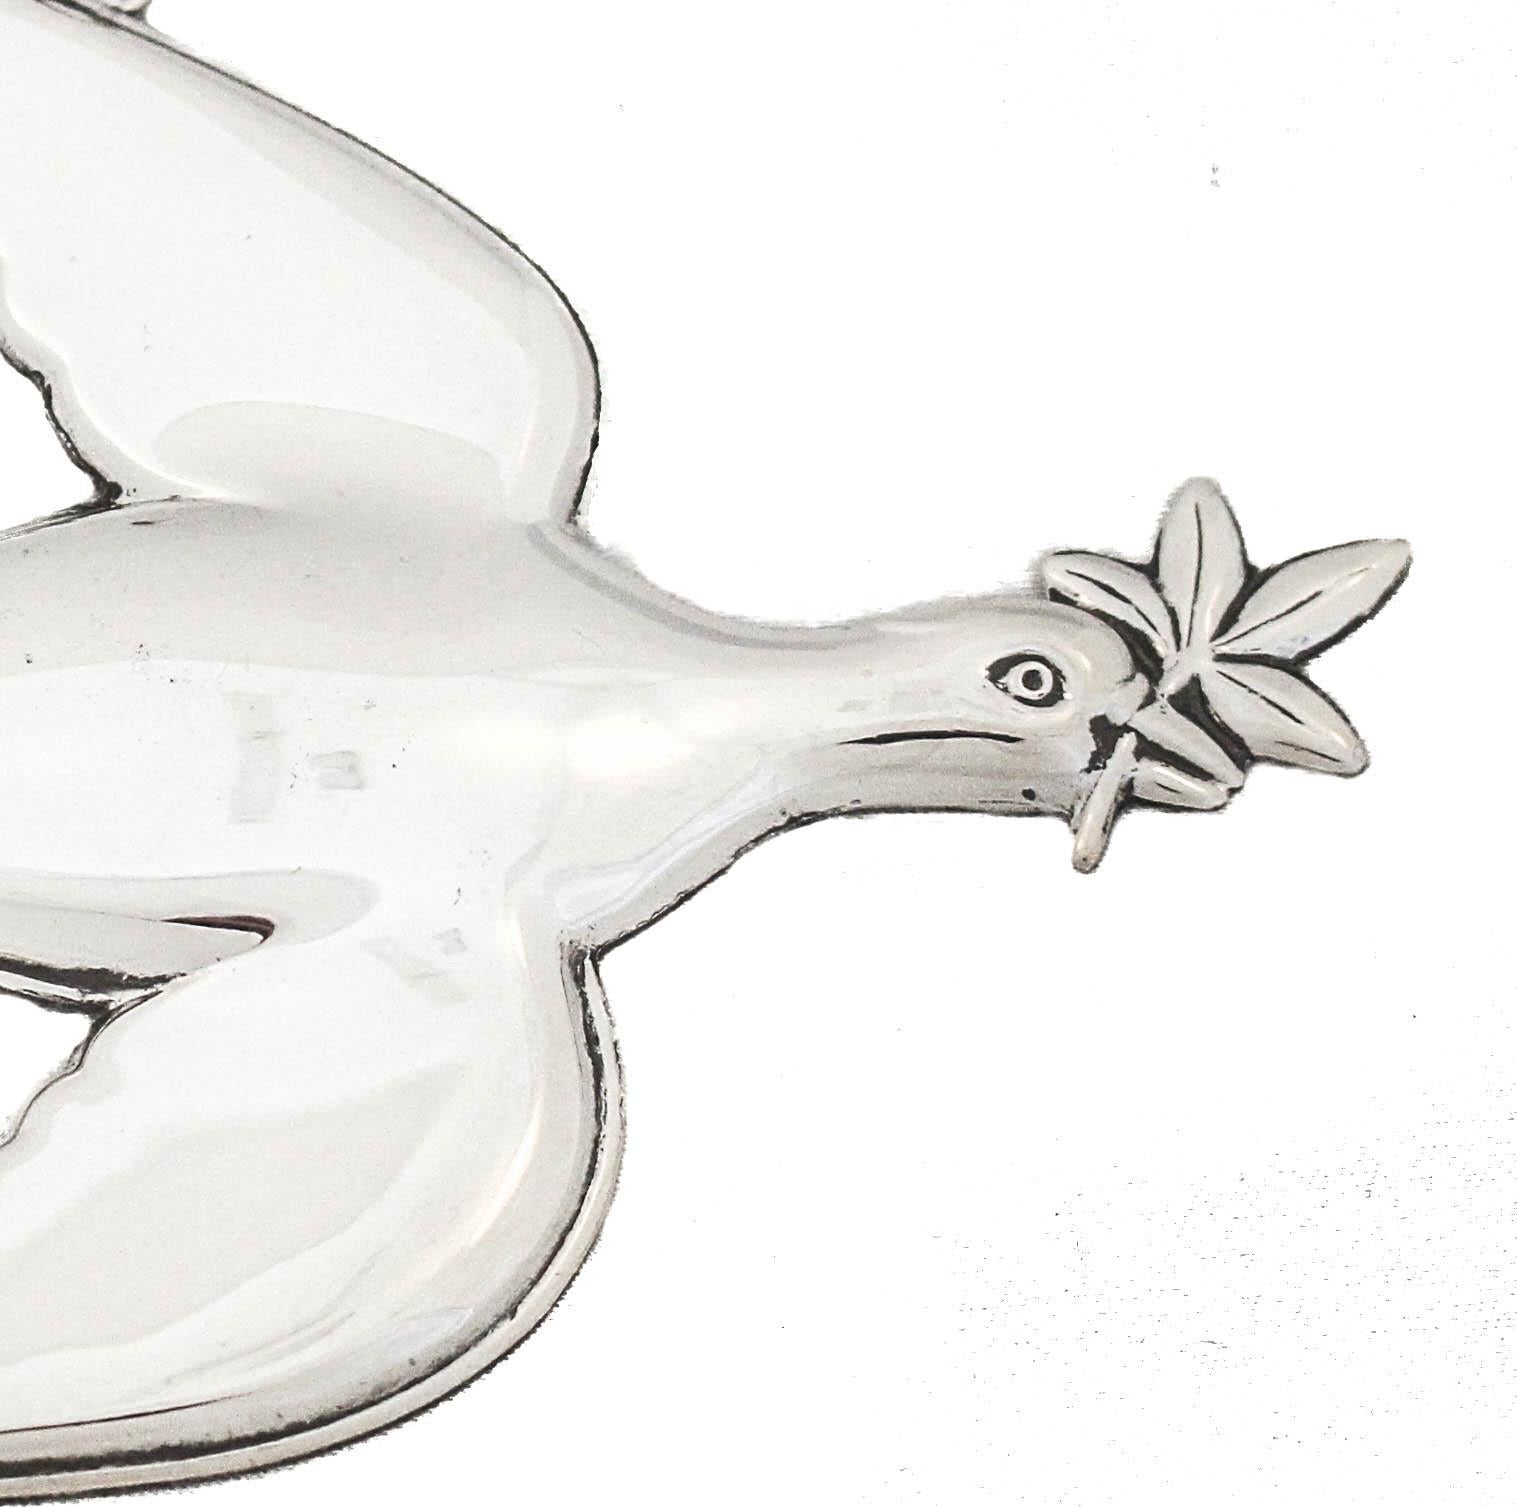 Being offered is a sterling silver Christmas ornament made by Gorham Silversmiths of Providence, Rhode Island, circa 1972.  It is of a Mount Vernon Dove with an olive branch in its beak.  An olive branch represents peace, good-will and friendship